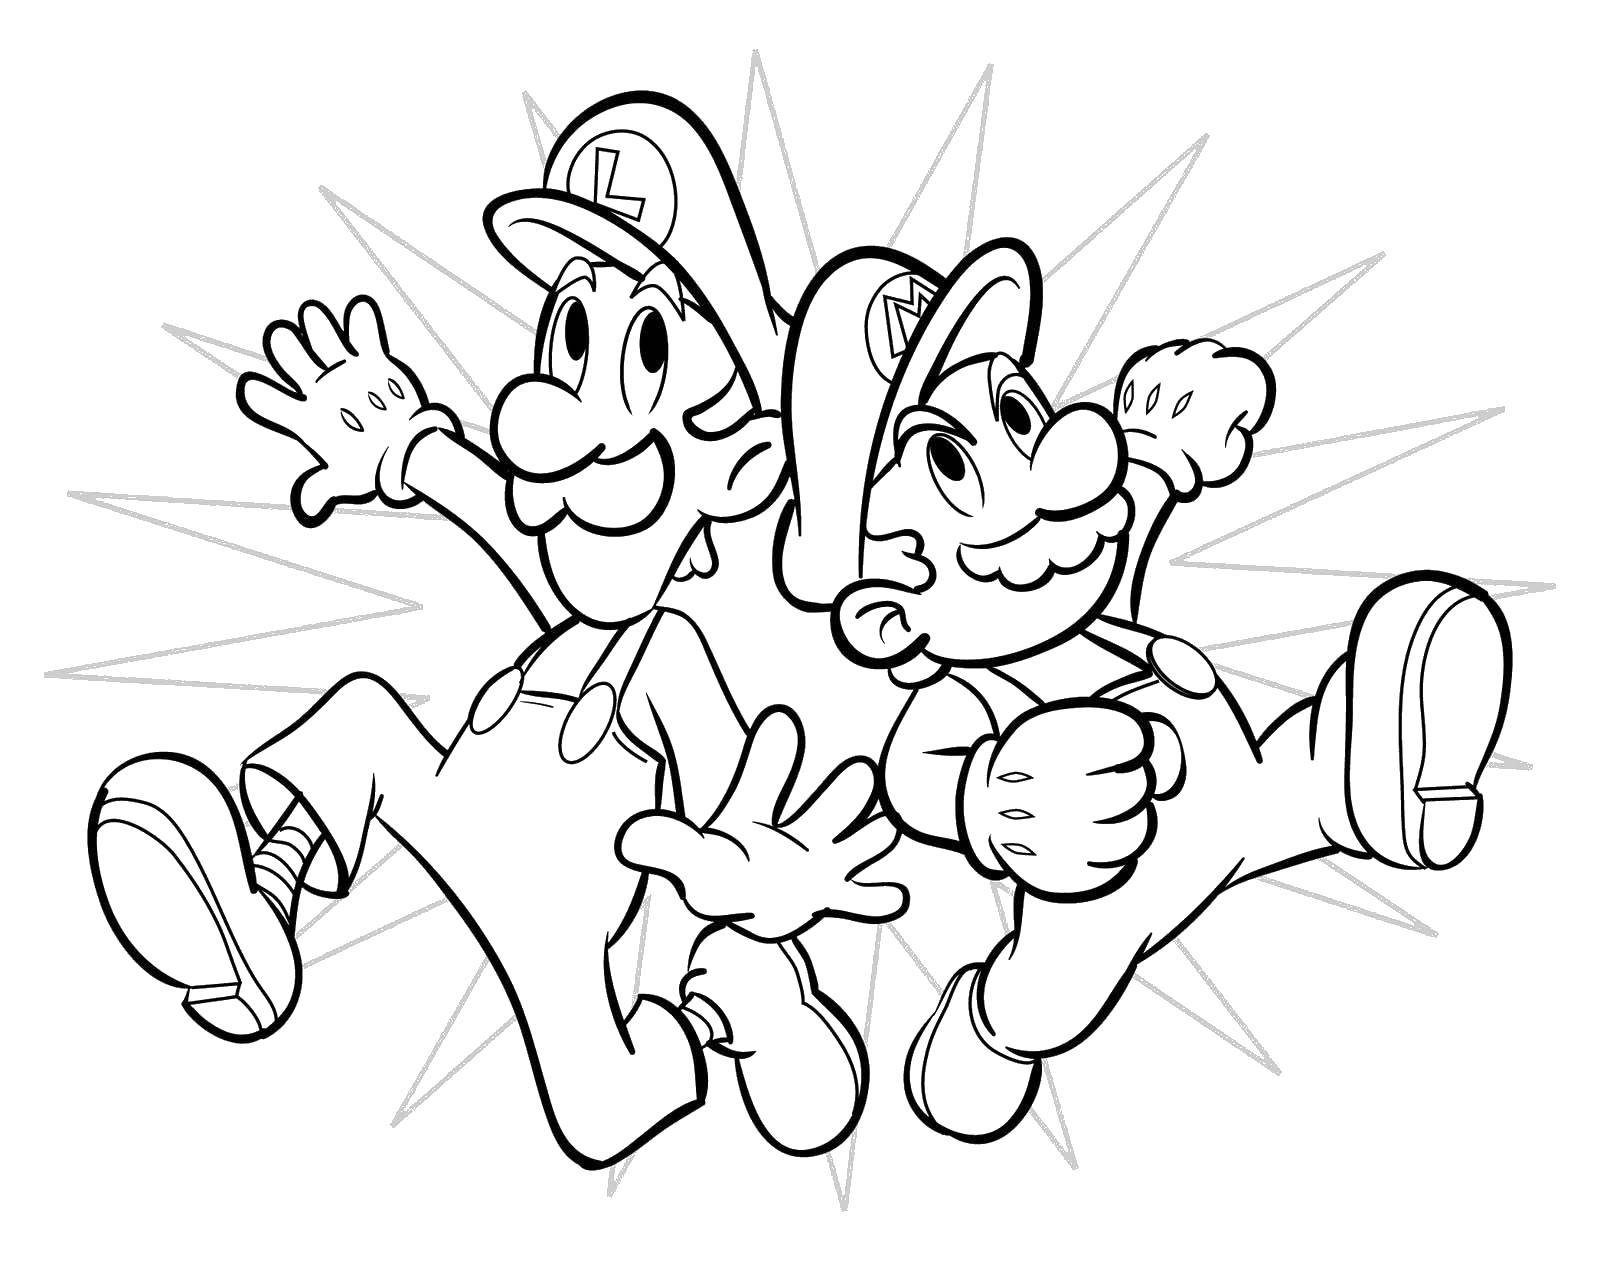 Coloring Game. Category games. Tags:  games, Mario.